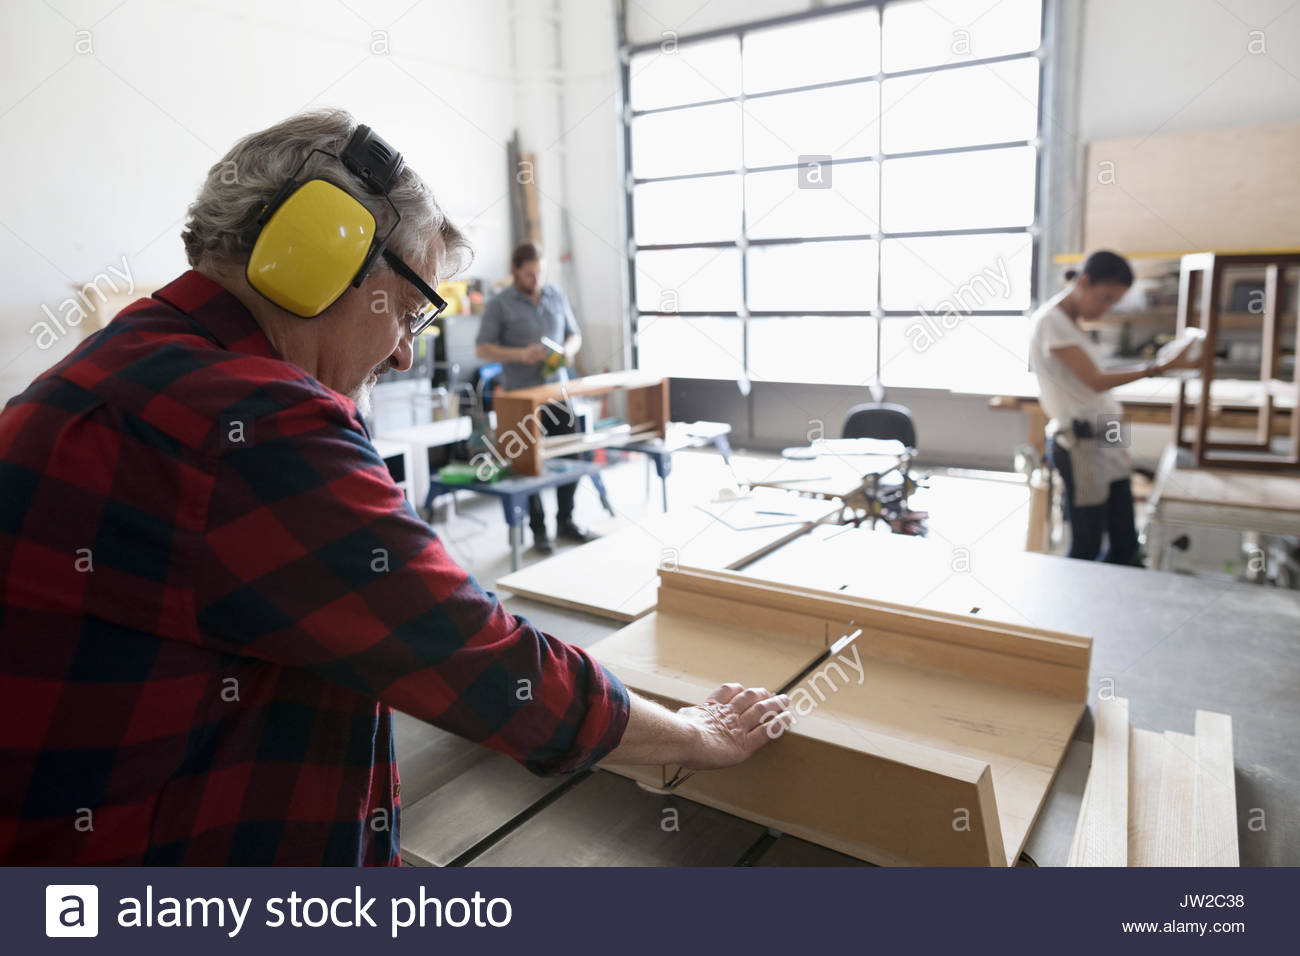 Male carpenter with ear protectors cutting wood at table saw in workshop Stock Photo